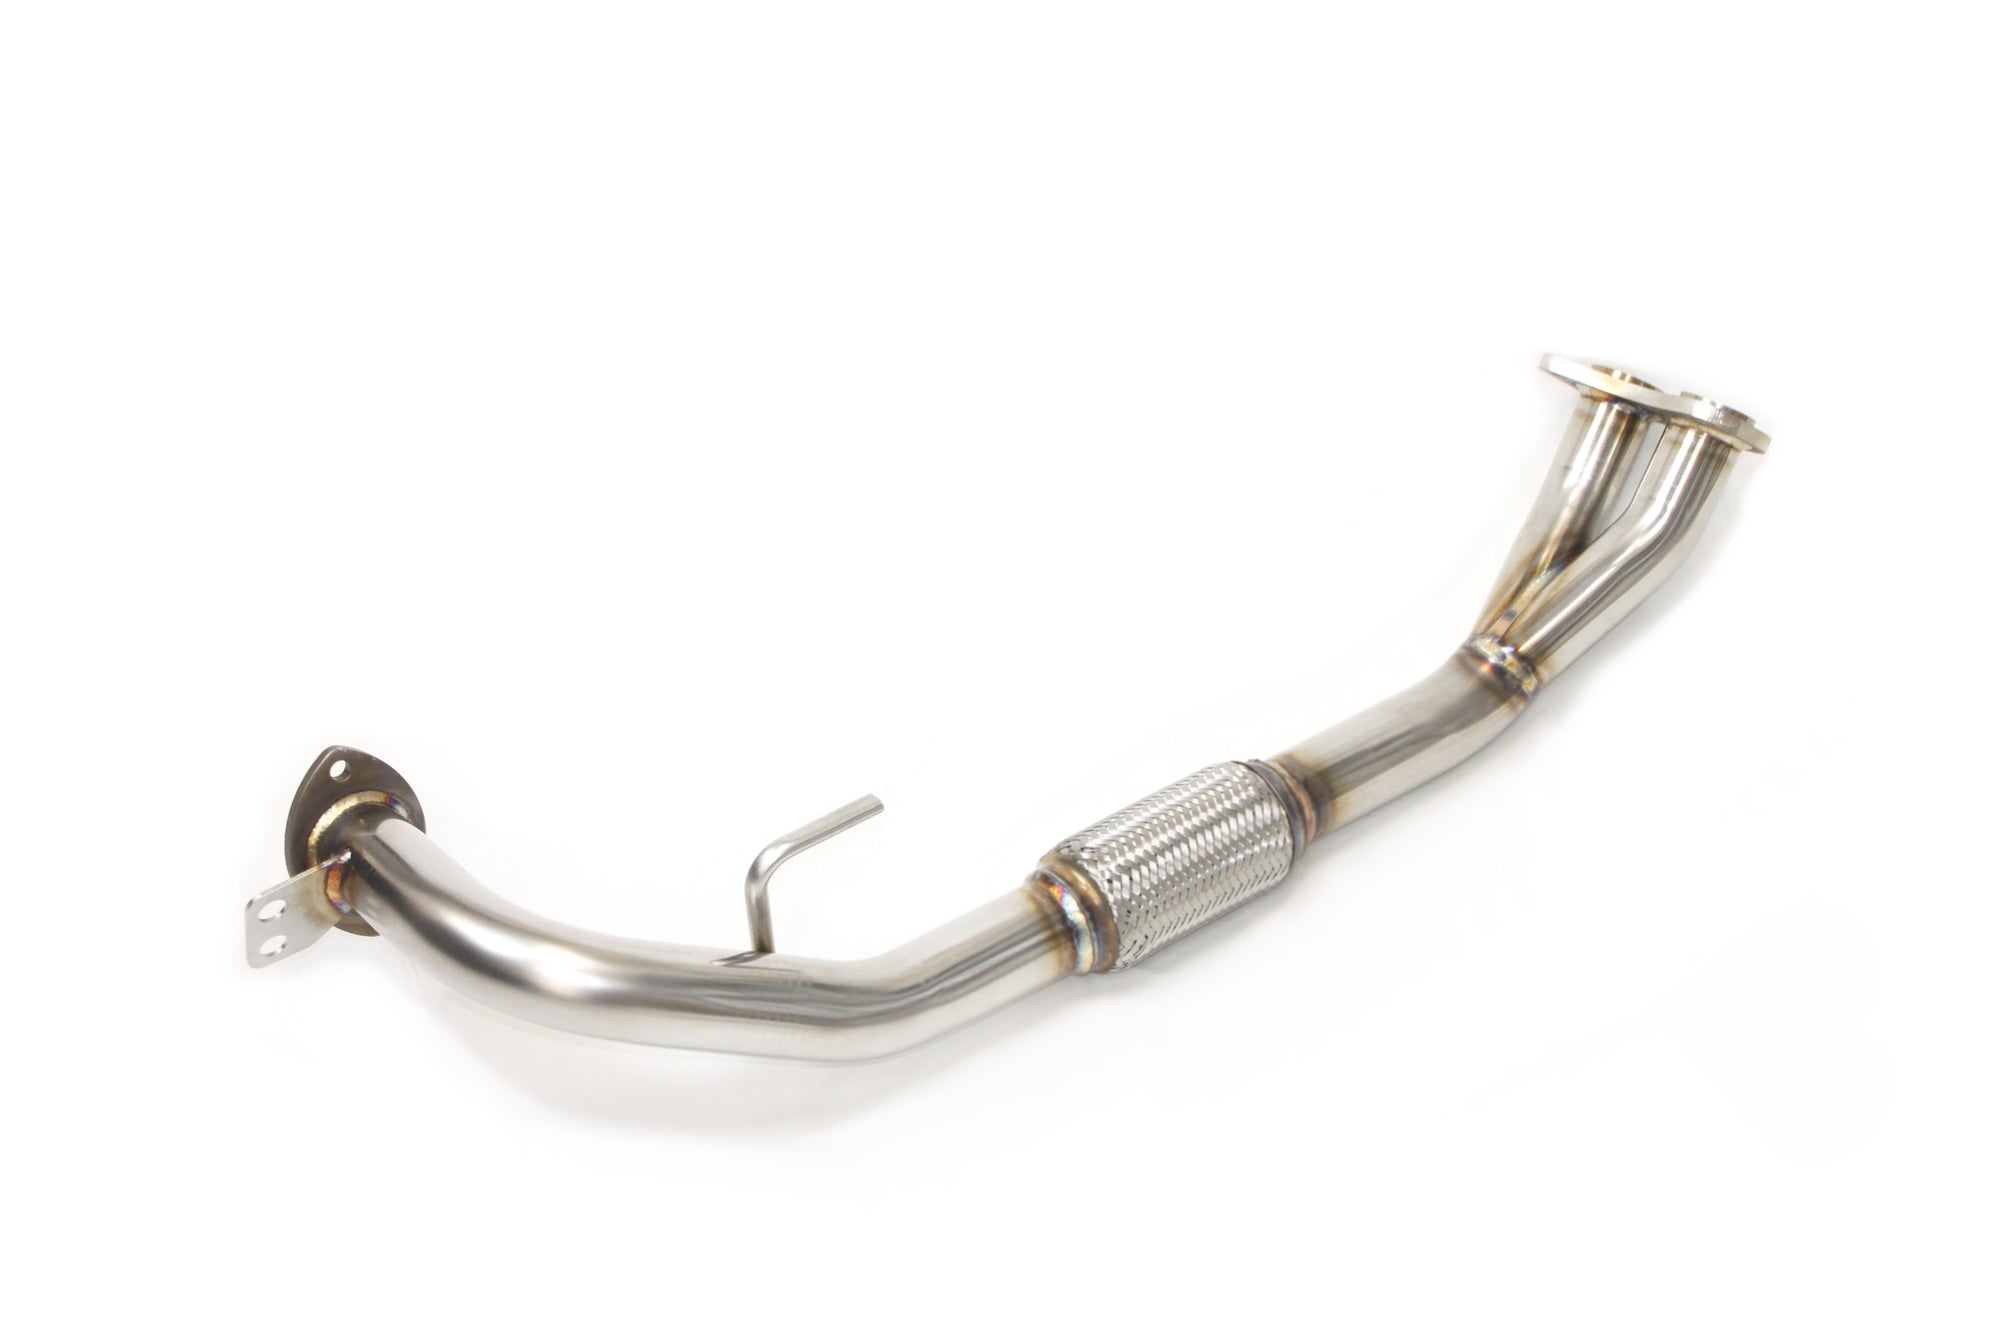 FUJITSUBO FRONT PIPE EXHAUST FOR TOYOTA MR2 TWIN CAM 16V AW11 610-23511